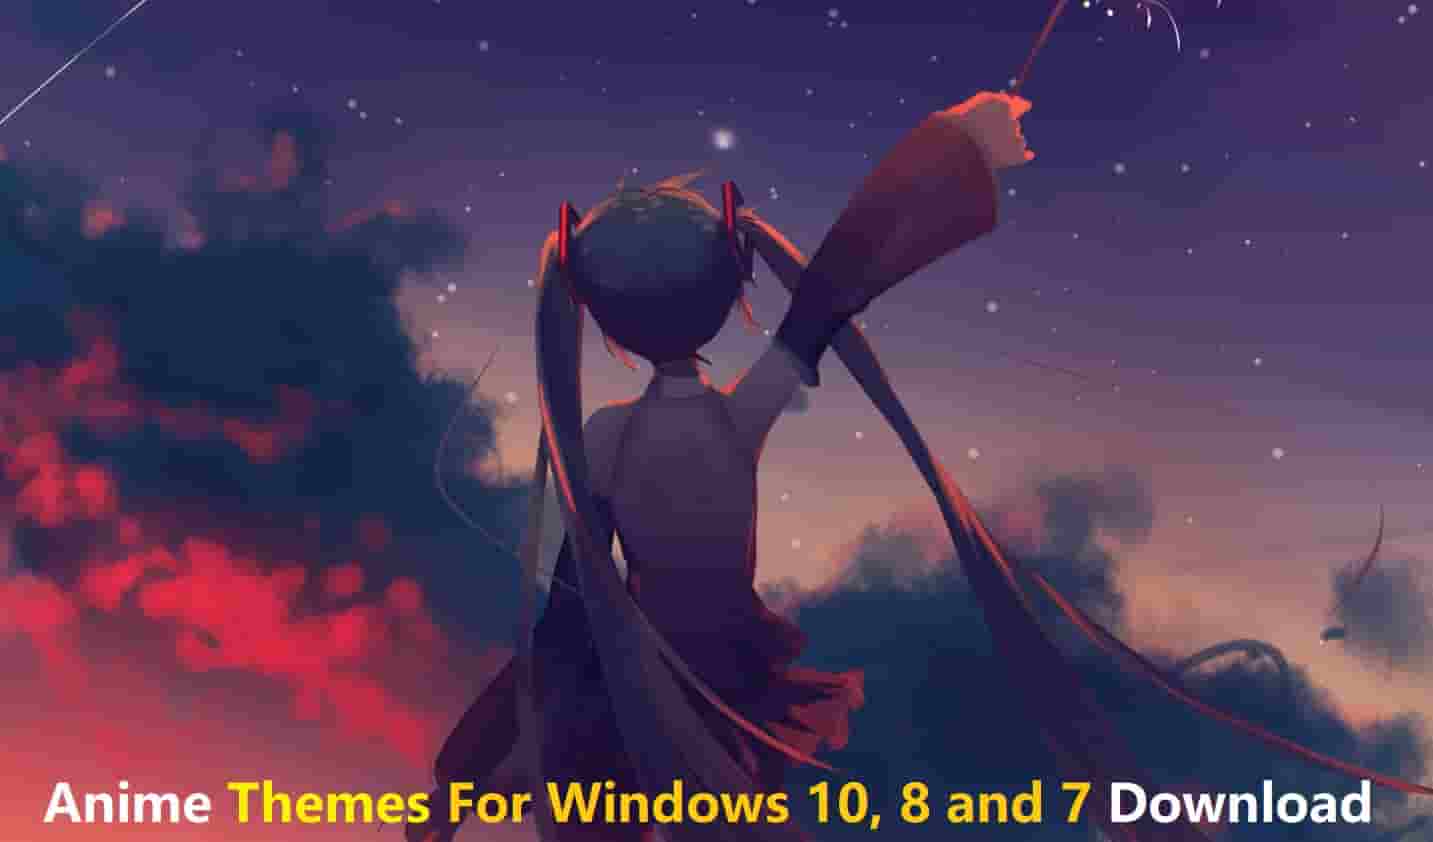 9 Best Anime Themes for Windows 10/11 Free Download 2022